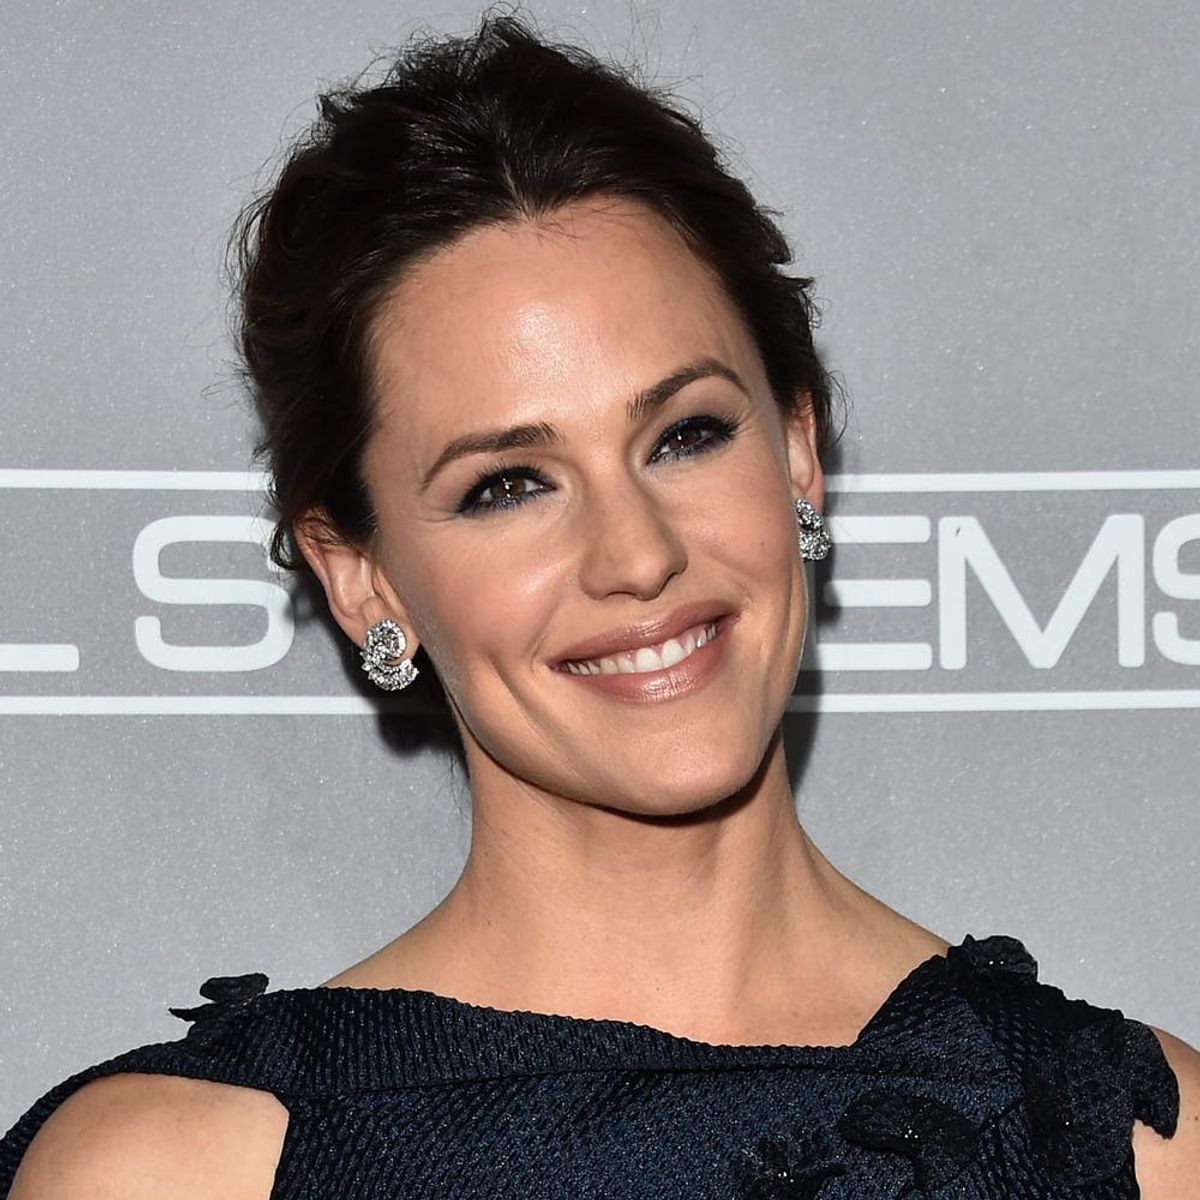 Jennifer Garner Wants to Work With President Trump to Make Strides on *This* Important Issue